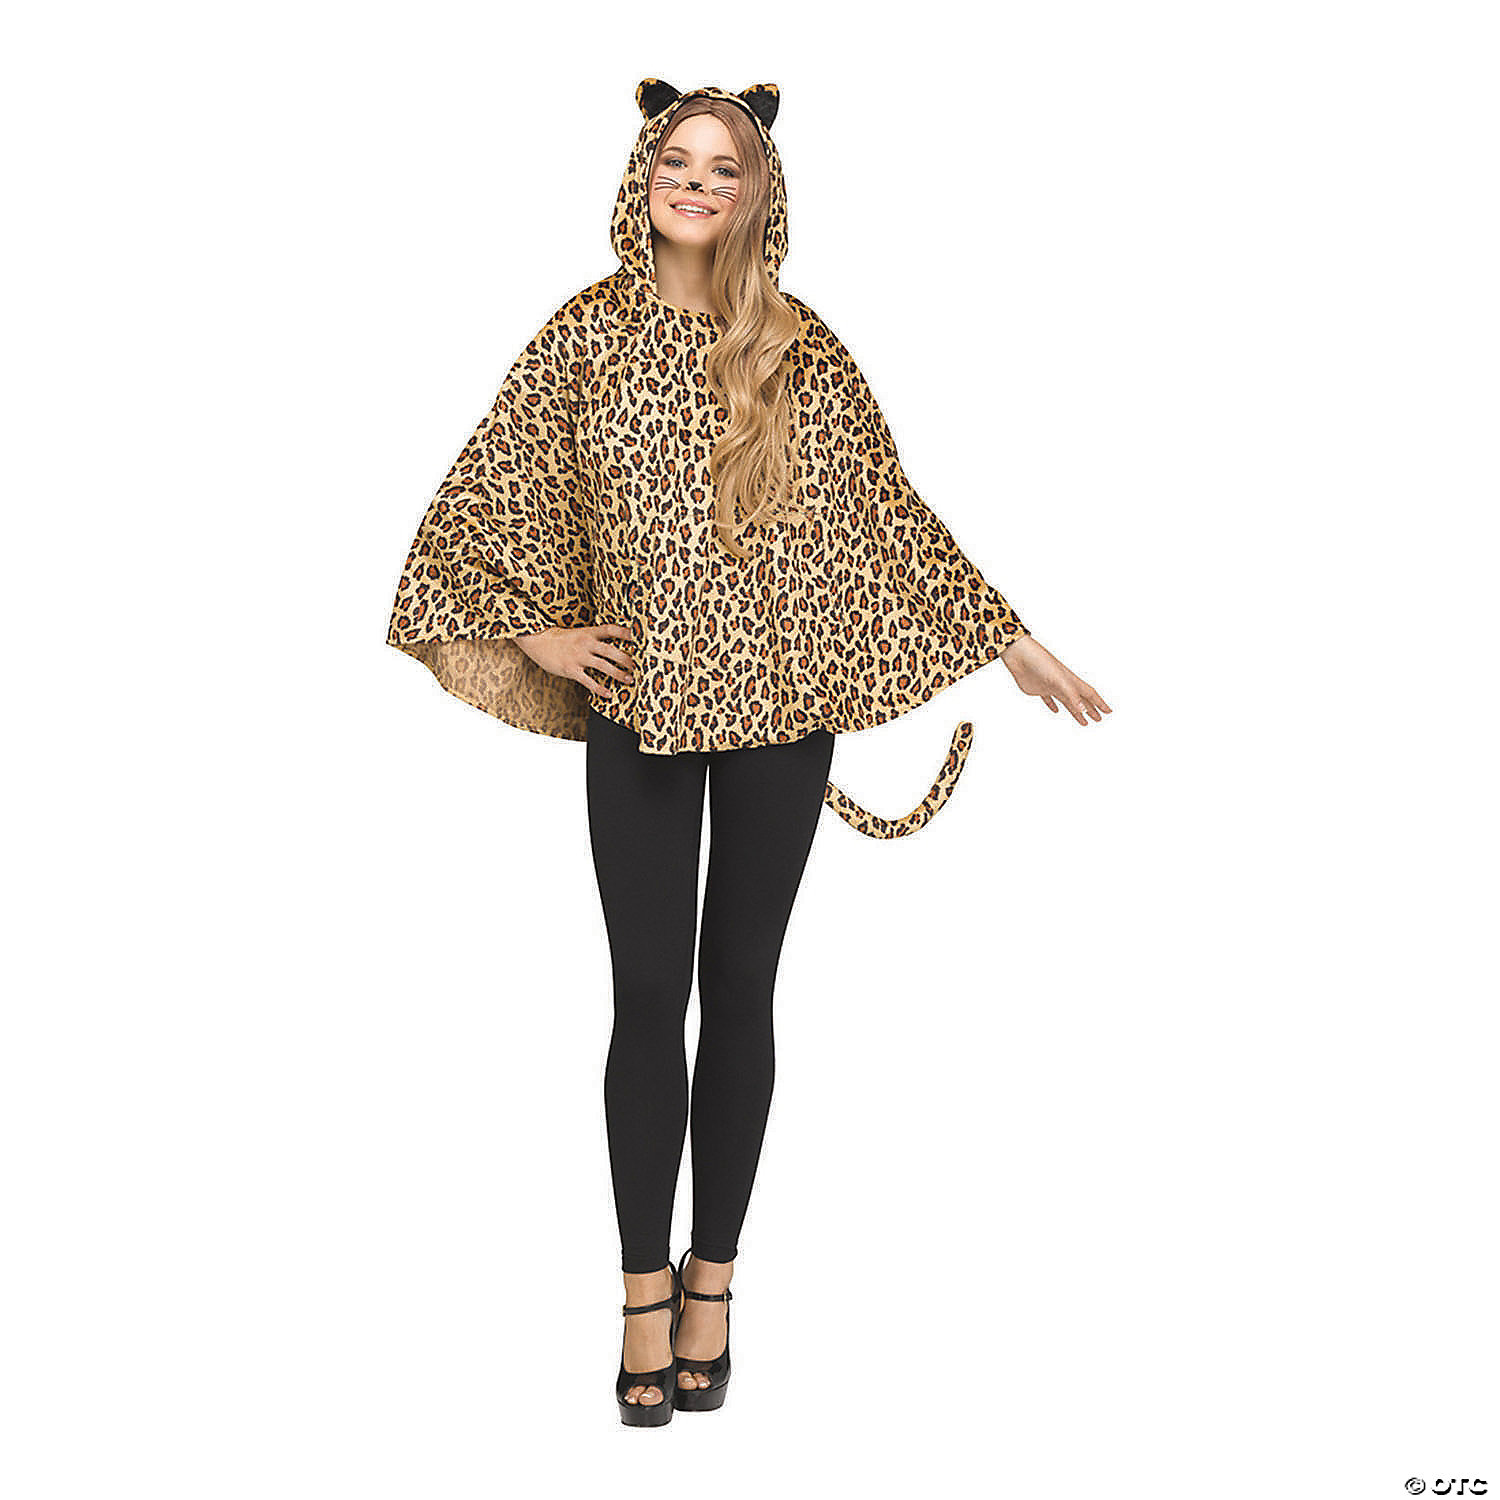 PONCHO LEOPARD HOODED CSTM ADULT - HALLOWEEN